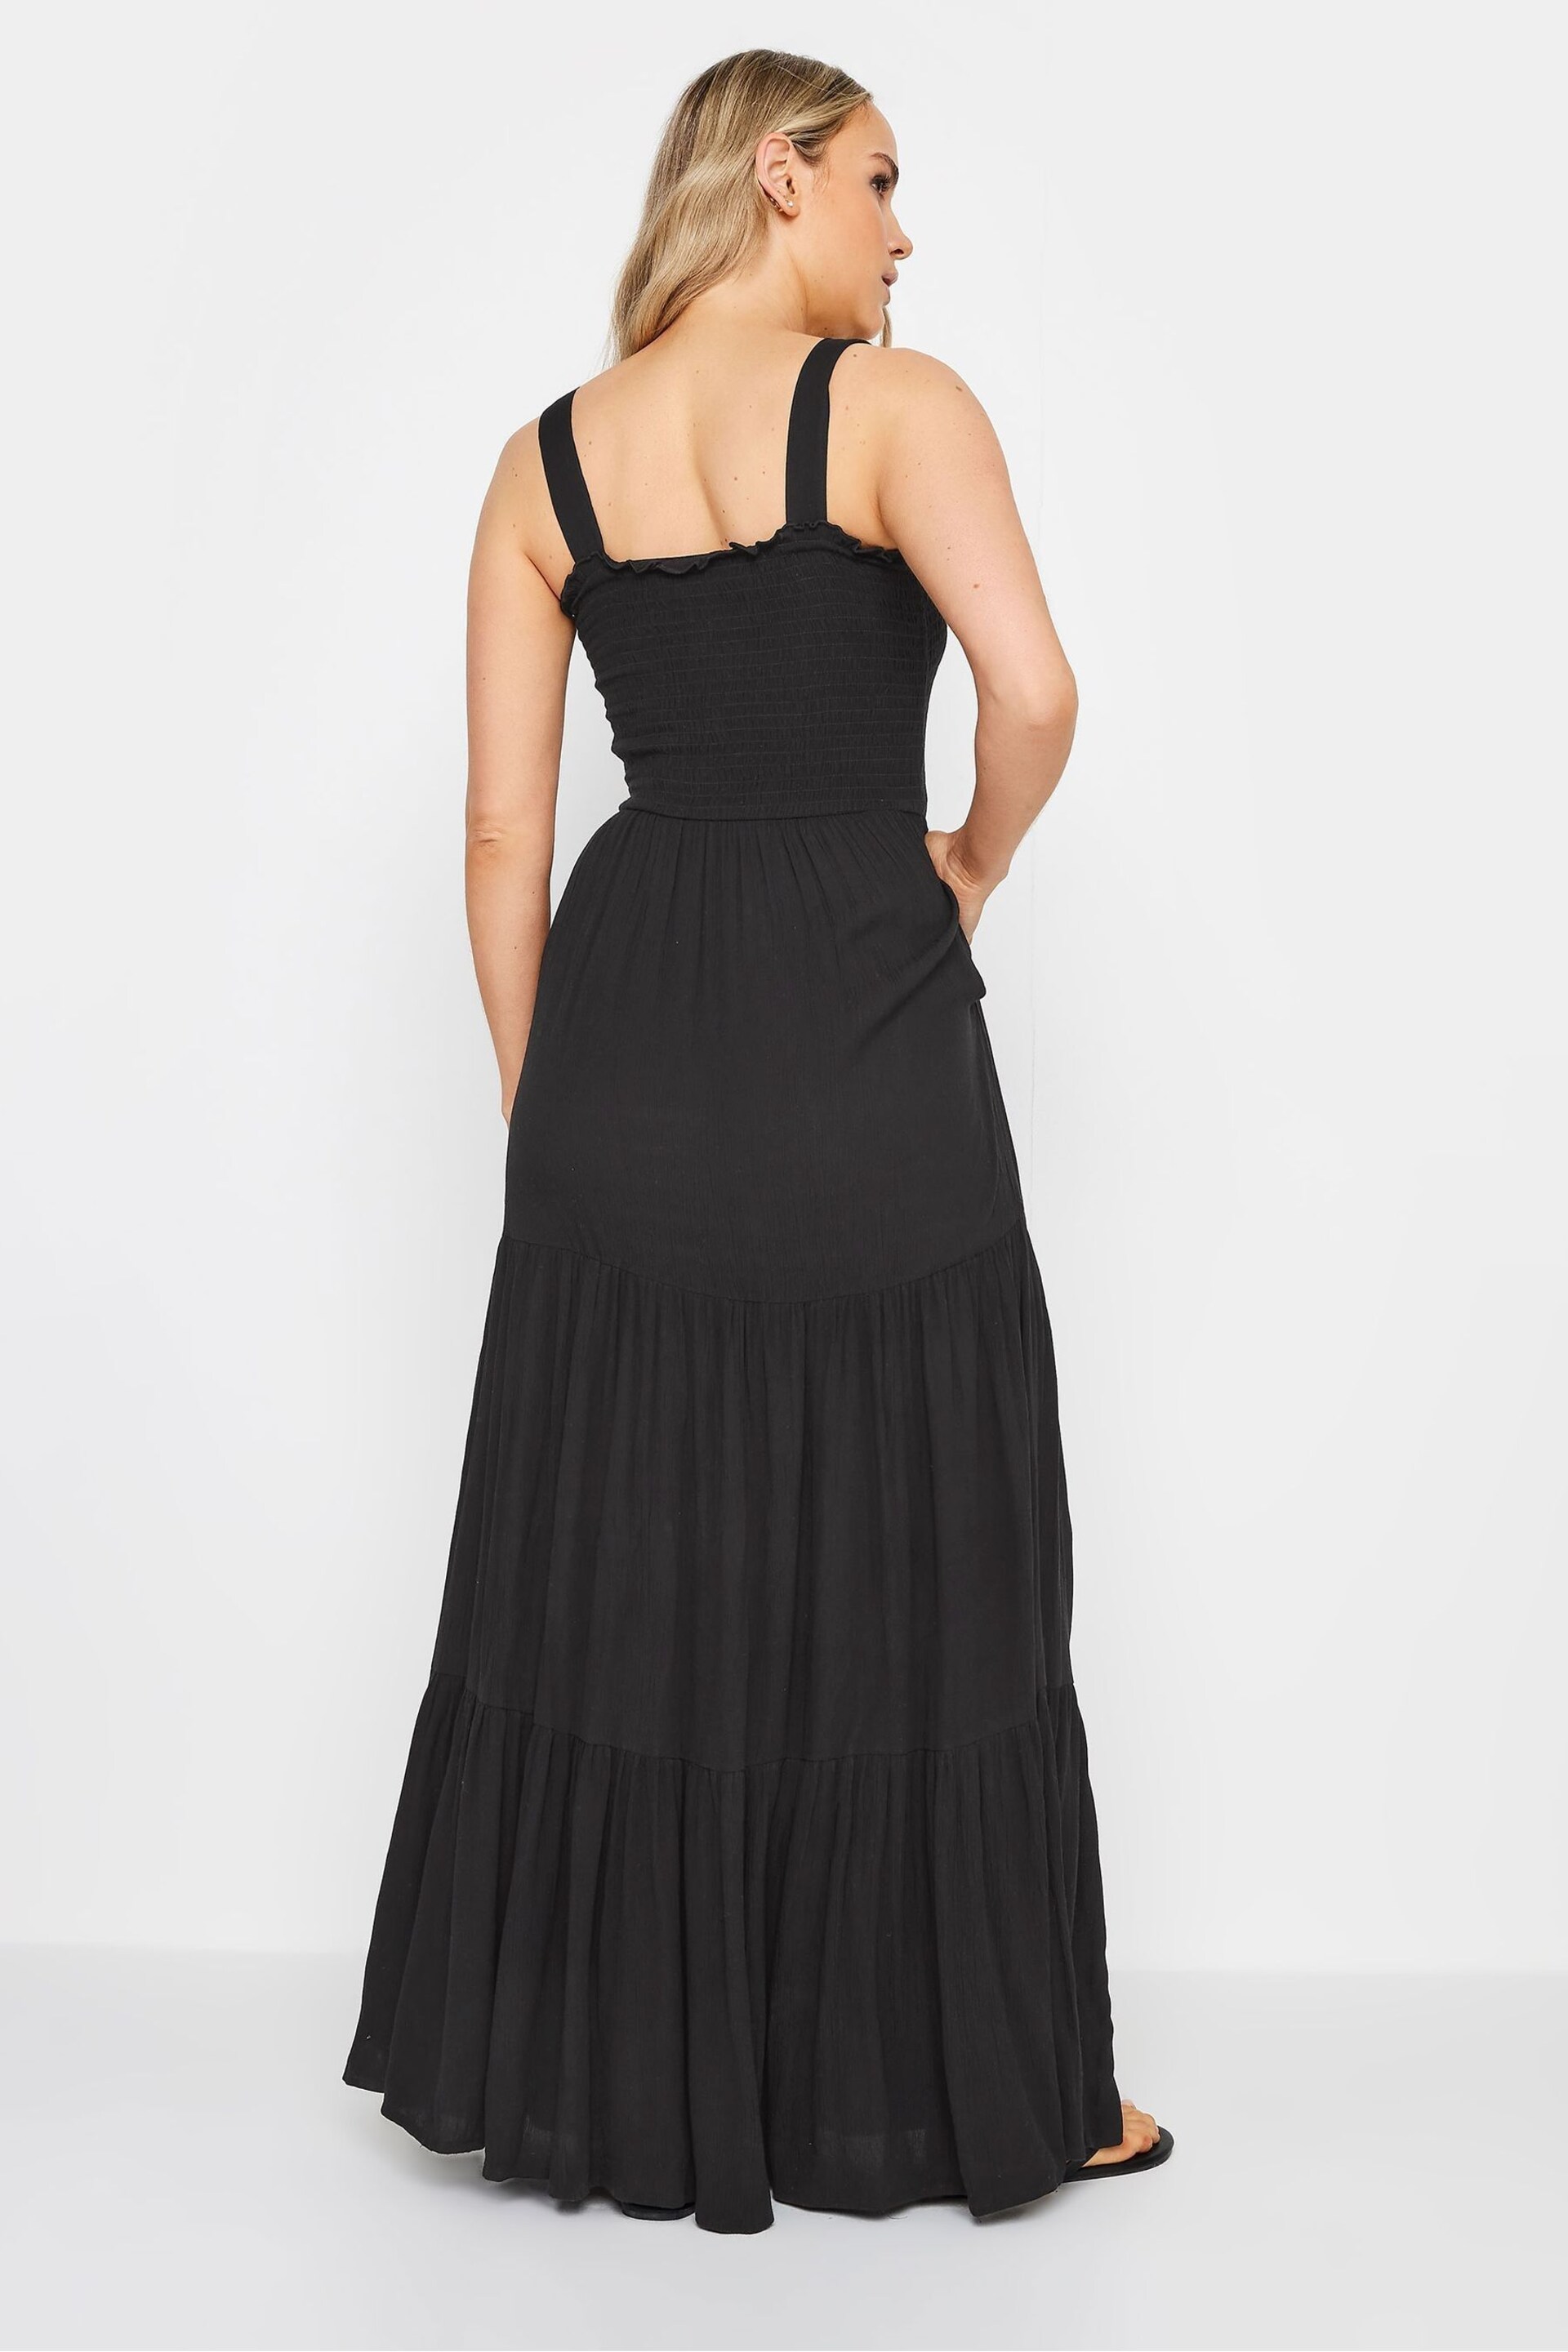 Long Tall Sally Black Crinkle Tiered Dress - Image 4 of 5